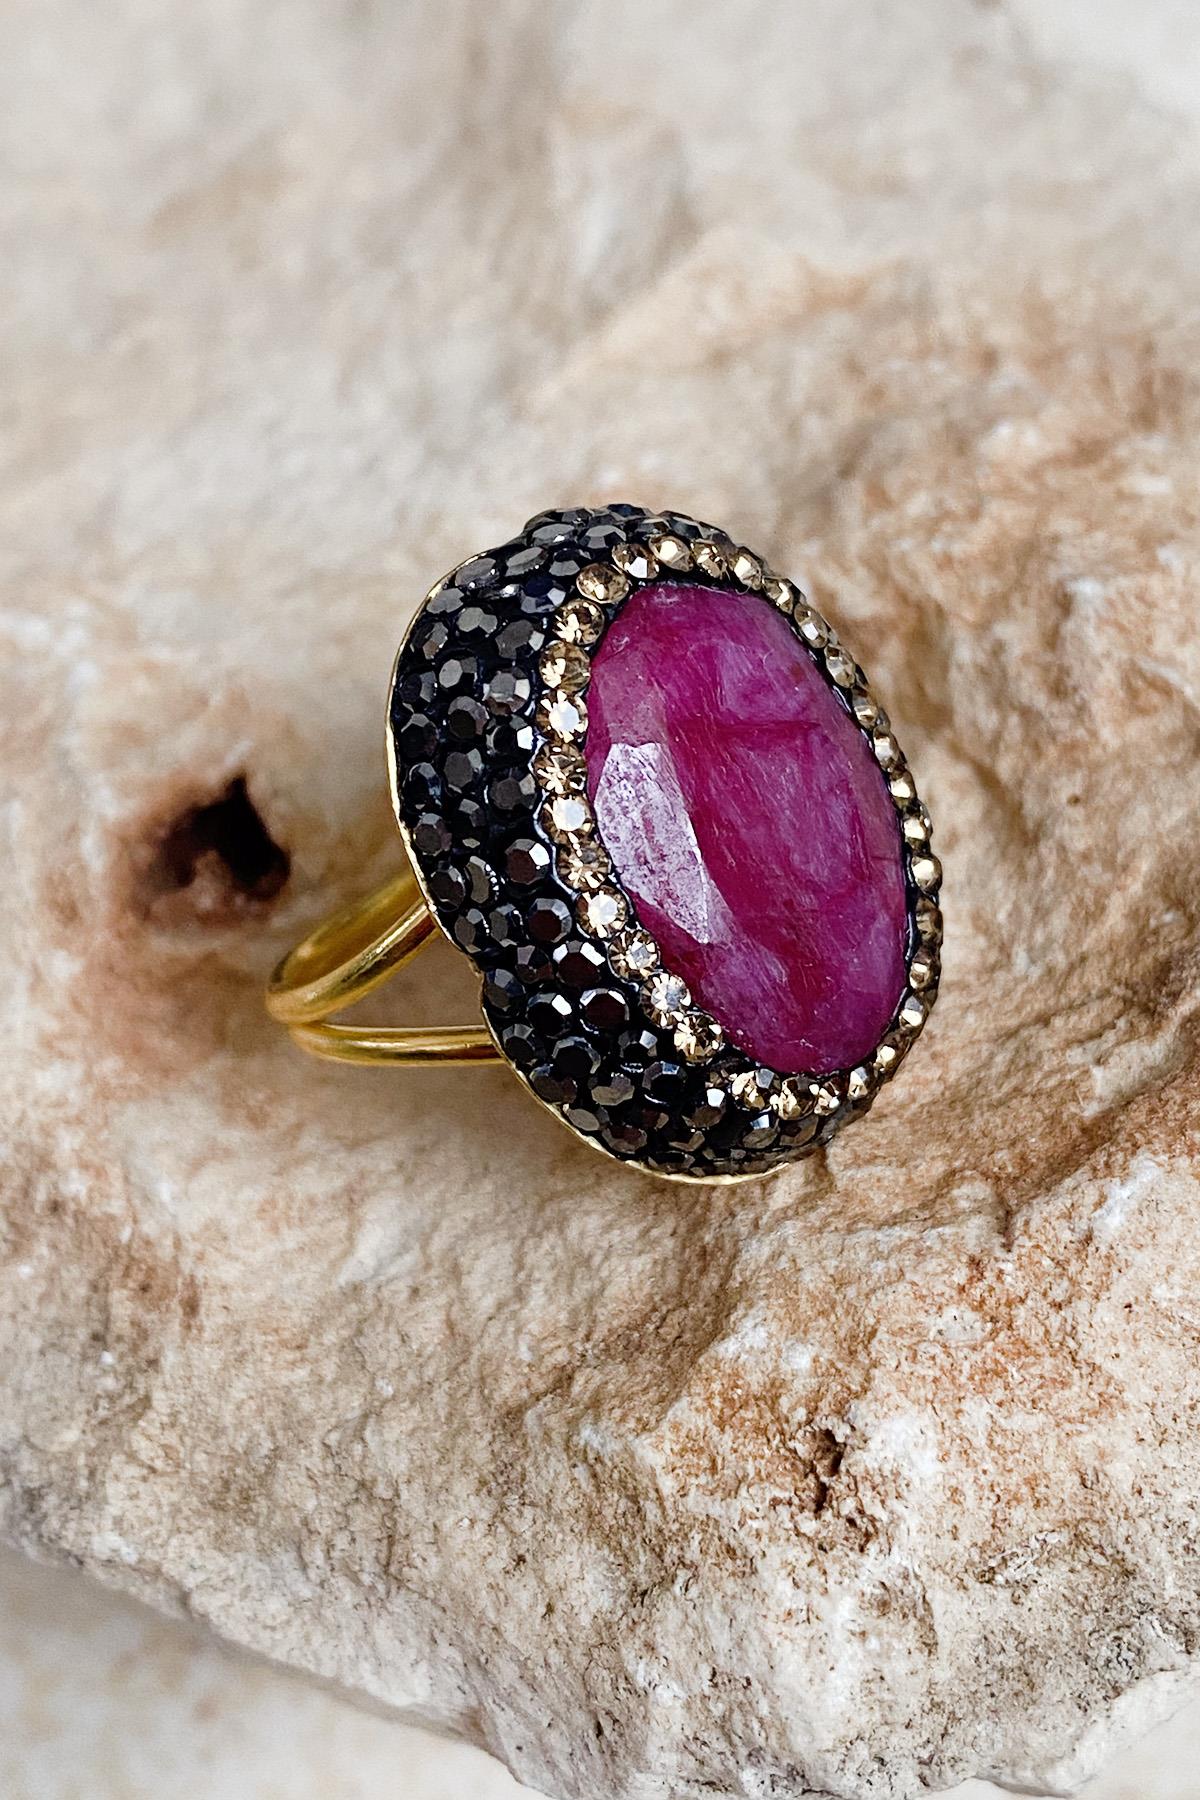 Acacia Series Red Ruby Natural Stone Handcrafted Women's Ring Adjustable Size